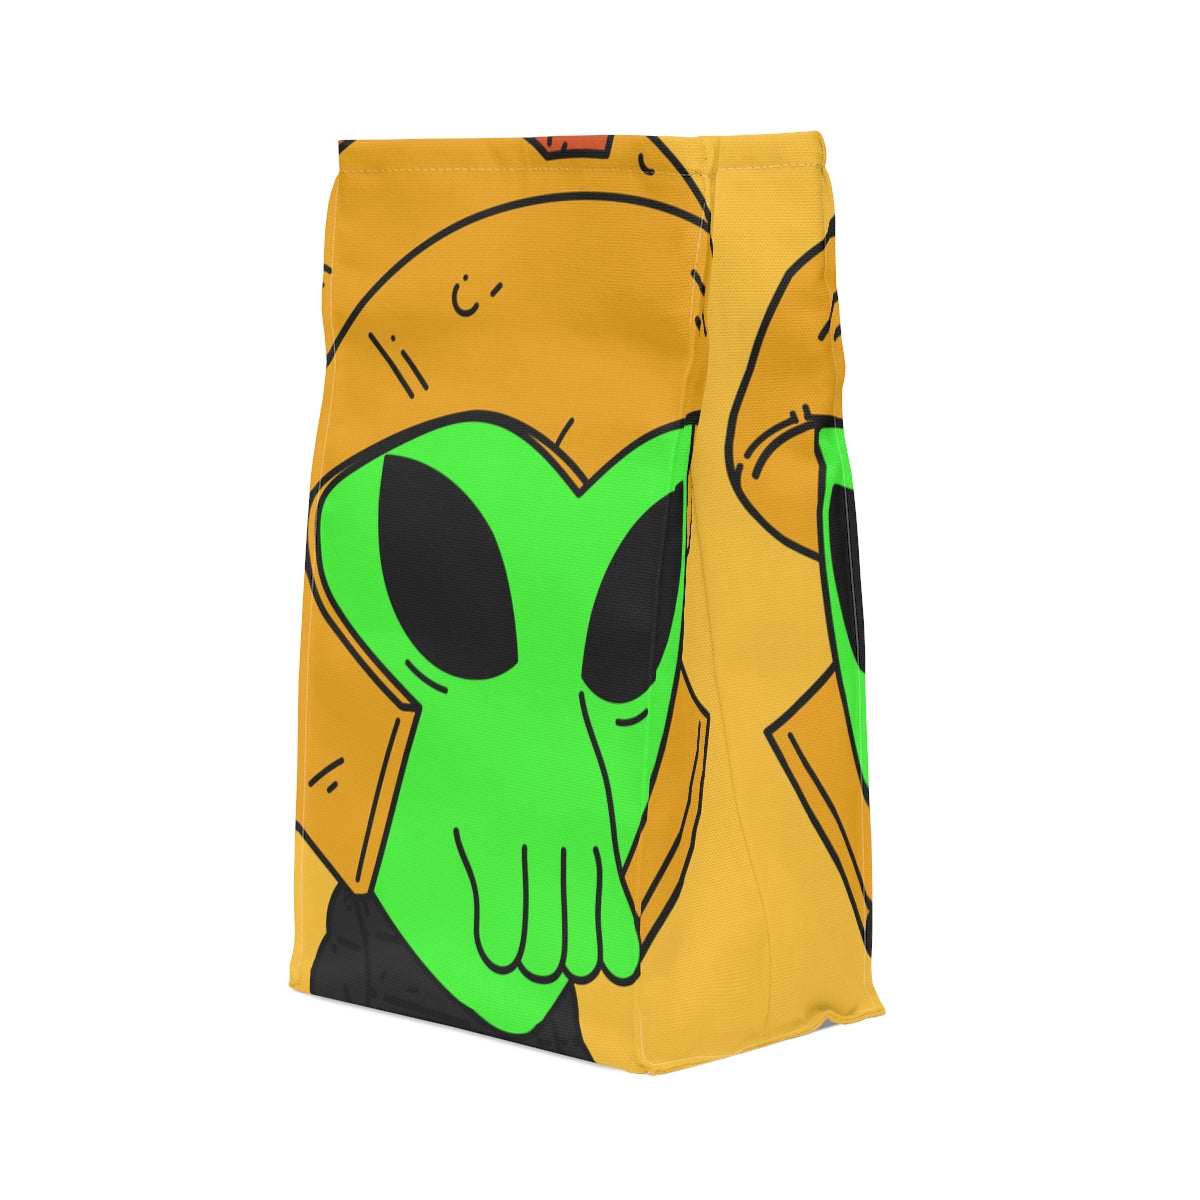 Green Spartan Helmet Alien Squid Mouth Visitor Polyester Lunch Bag